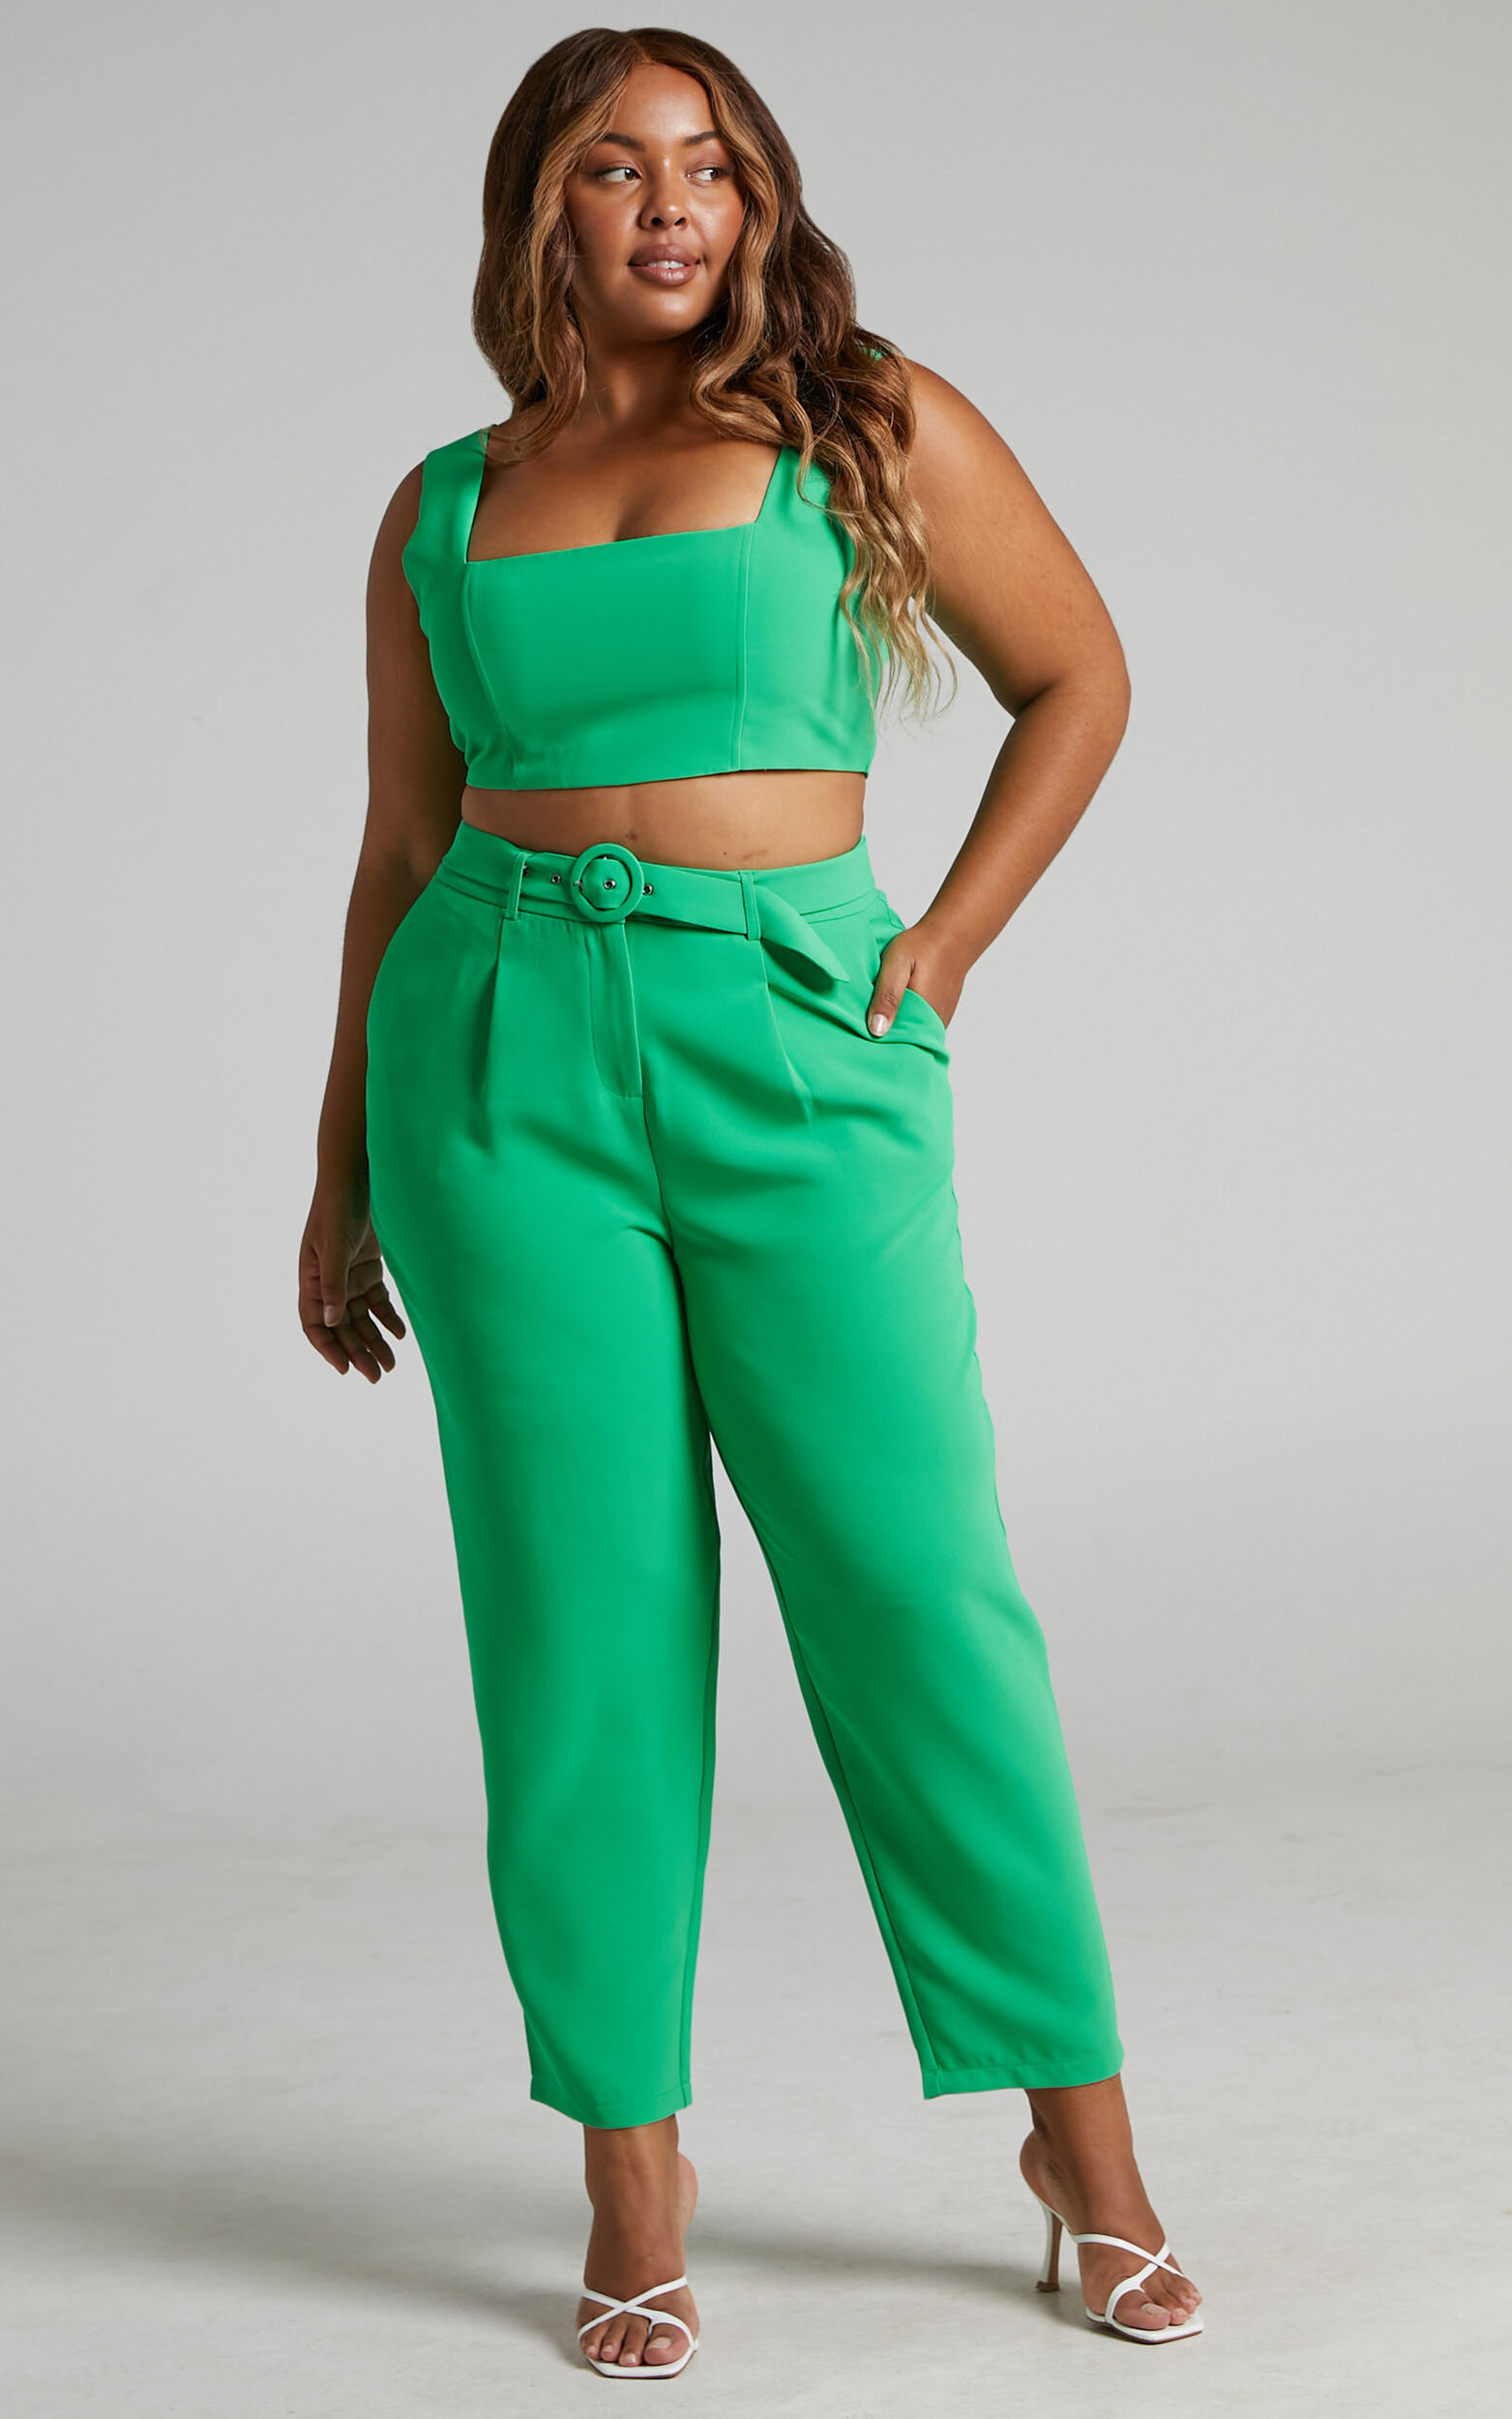 Reyna Two Piece Set - Crop Top and Tailored Pants Set in Green